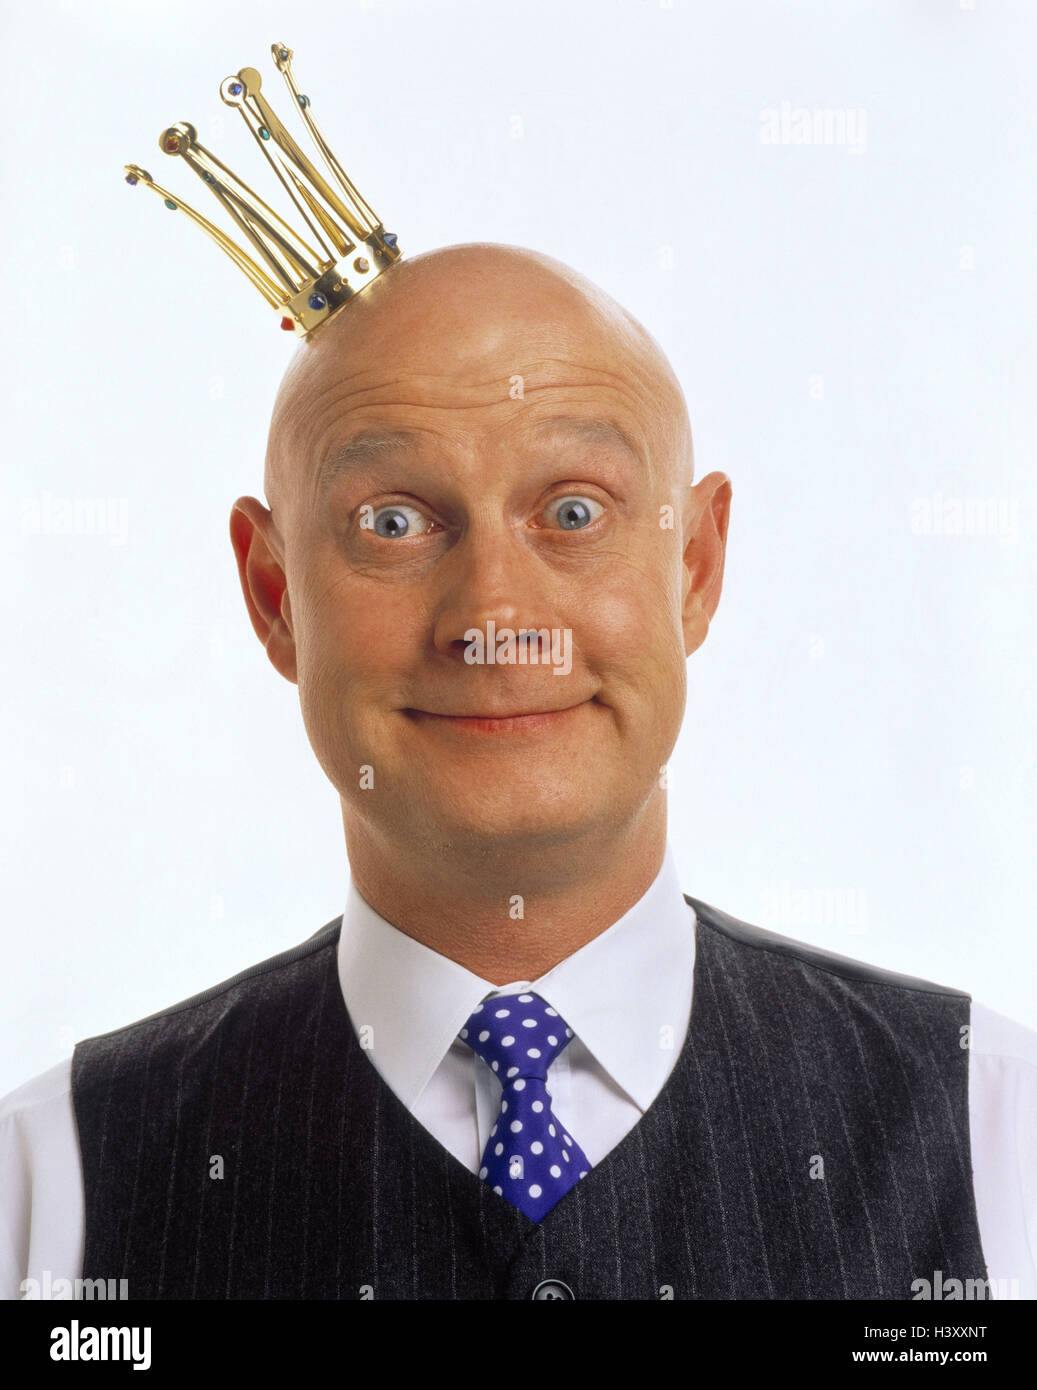 Man, bald head, shirt, waistcoat, tie, crown, facial play, portrait, Men,  head, bald, shaves, smile hairlessly, crowned, fun, lining, 